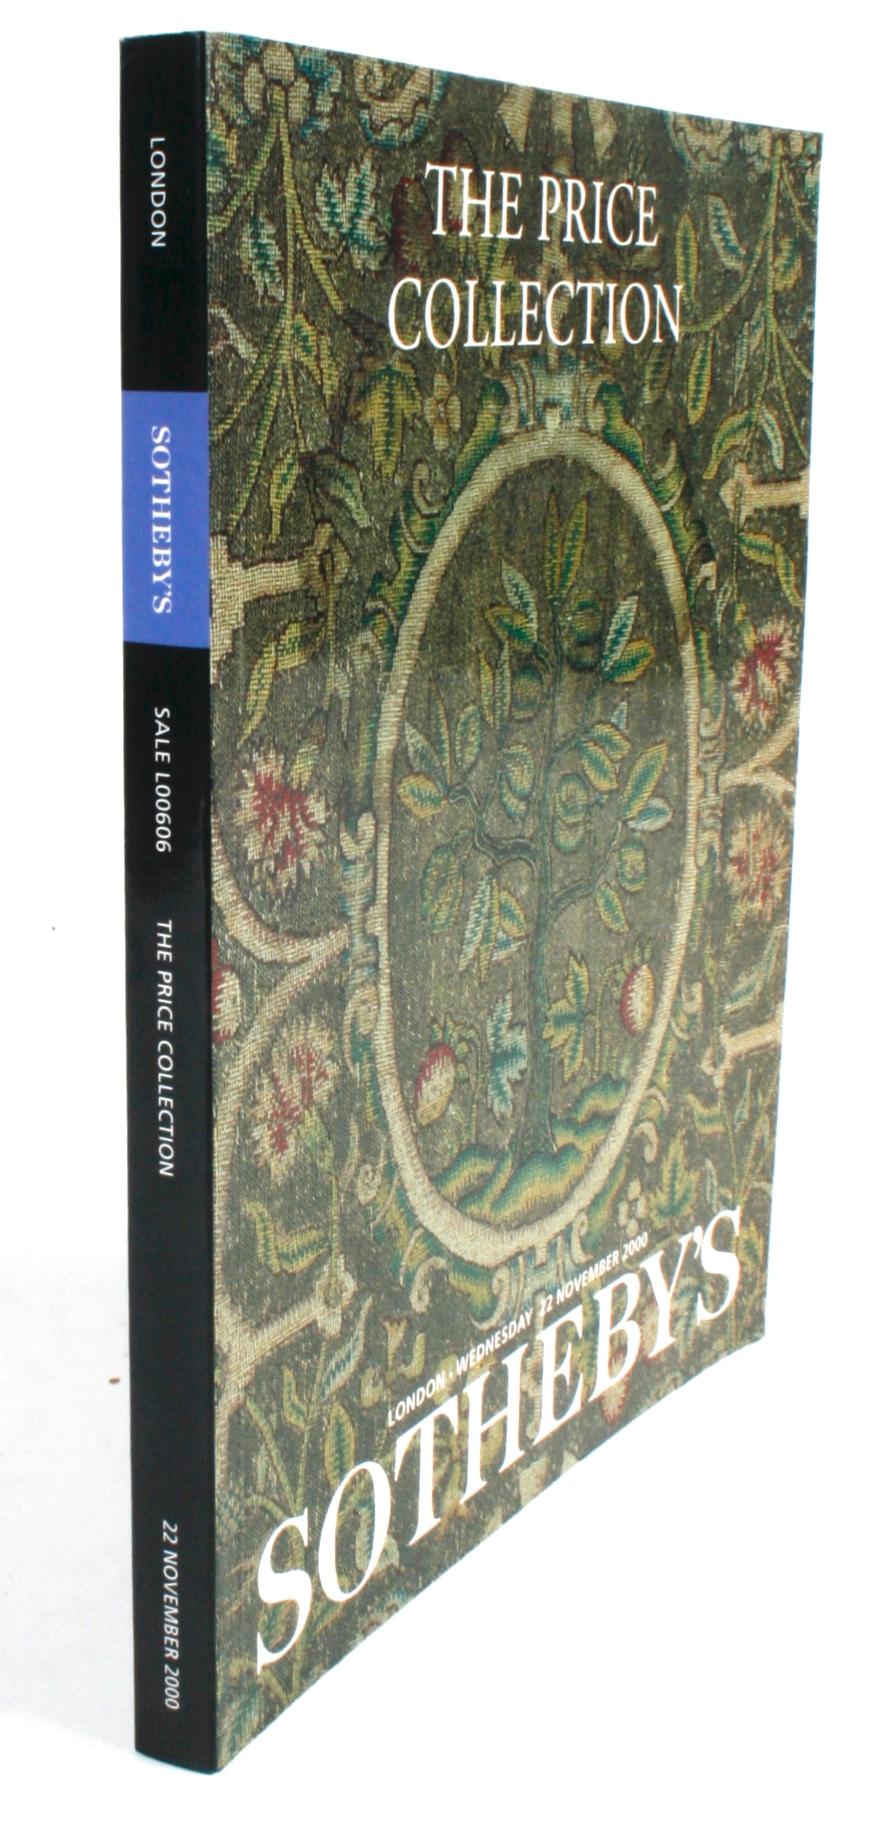 Sotheby's London; The Price Collection. London: Sotheby's, 2000. Soft cover. 260 pp. An auction catalogue of the property of the late Sir Henry Price that was held in London on Wednesday November 22, 2000. The furniture and works of art are from his